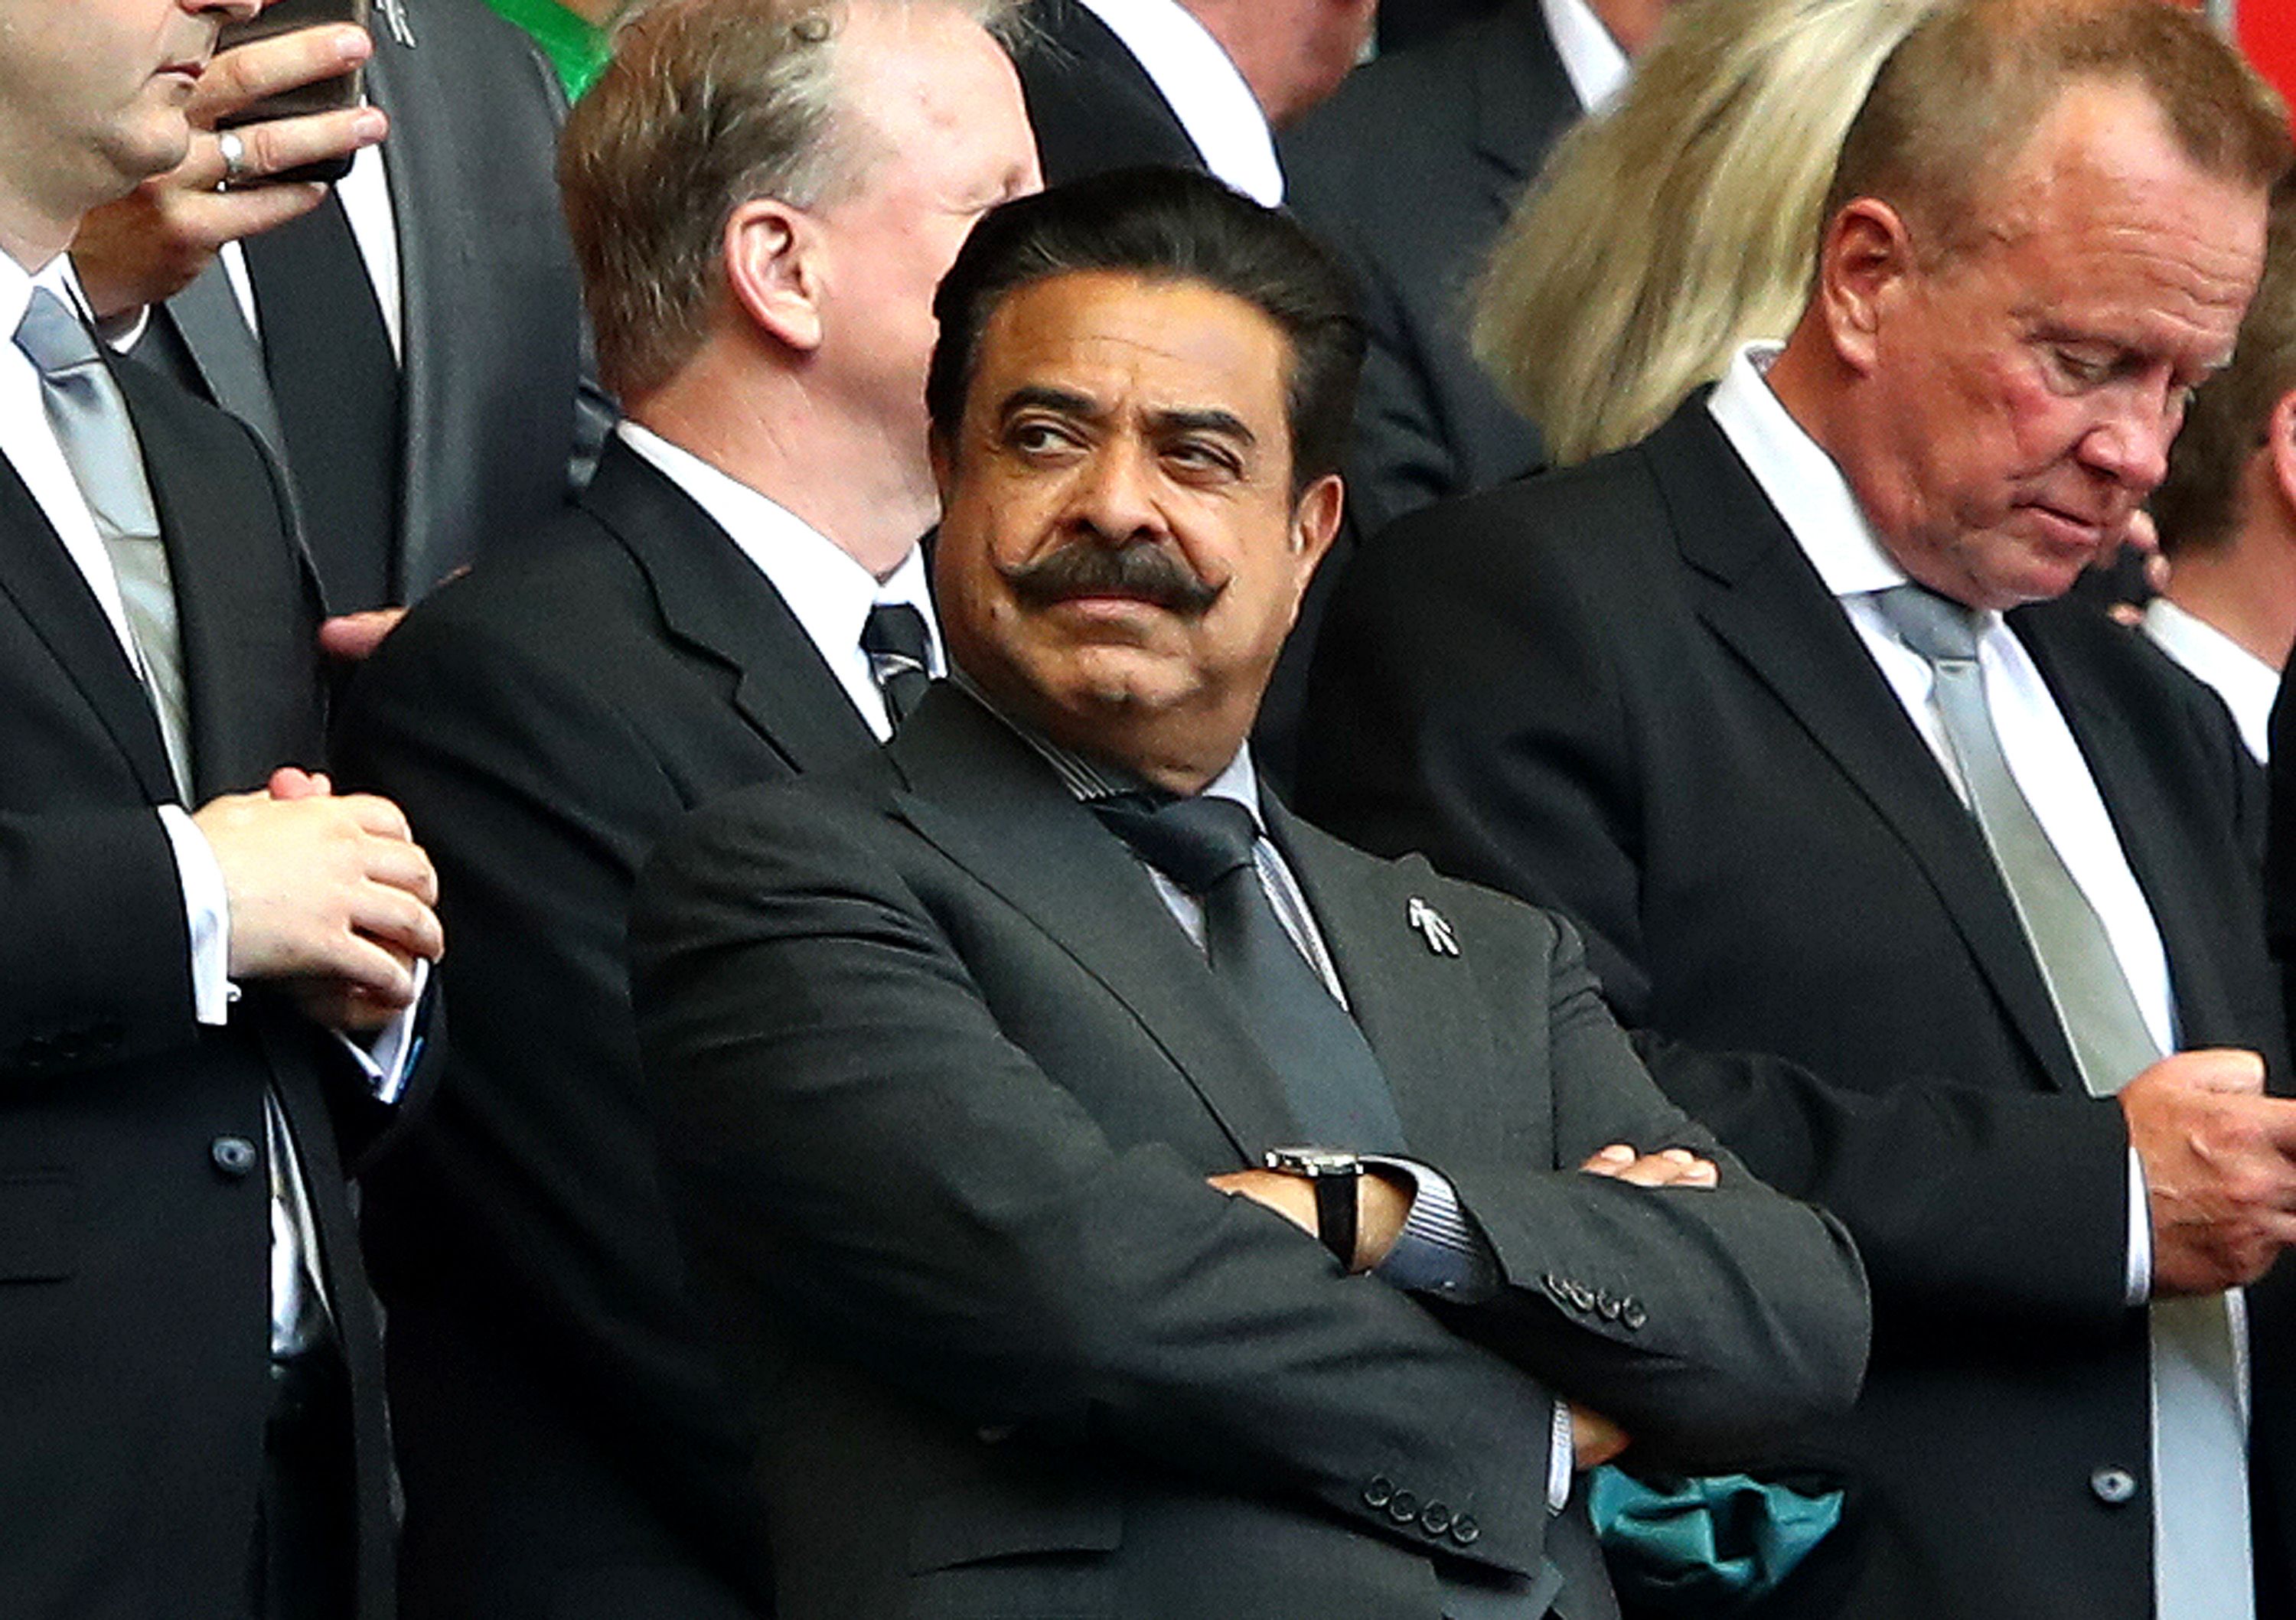 Wembley LONDON, ENGLAND - MAY 26: Fulham owner, Shahid Khan looks on prior to the Sky Bet Championship Play Off Final between Aston Villa and Fulham at Wembley Stadium on May 26, 2018 in London, England. (Photo by Clive Mason/Getty Images)